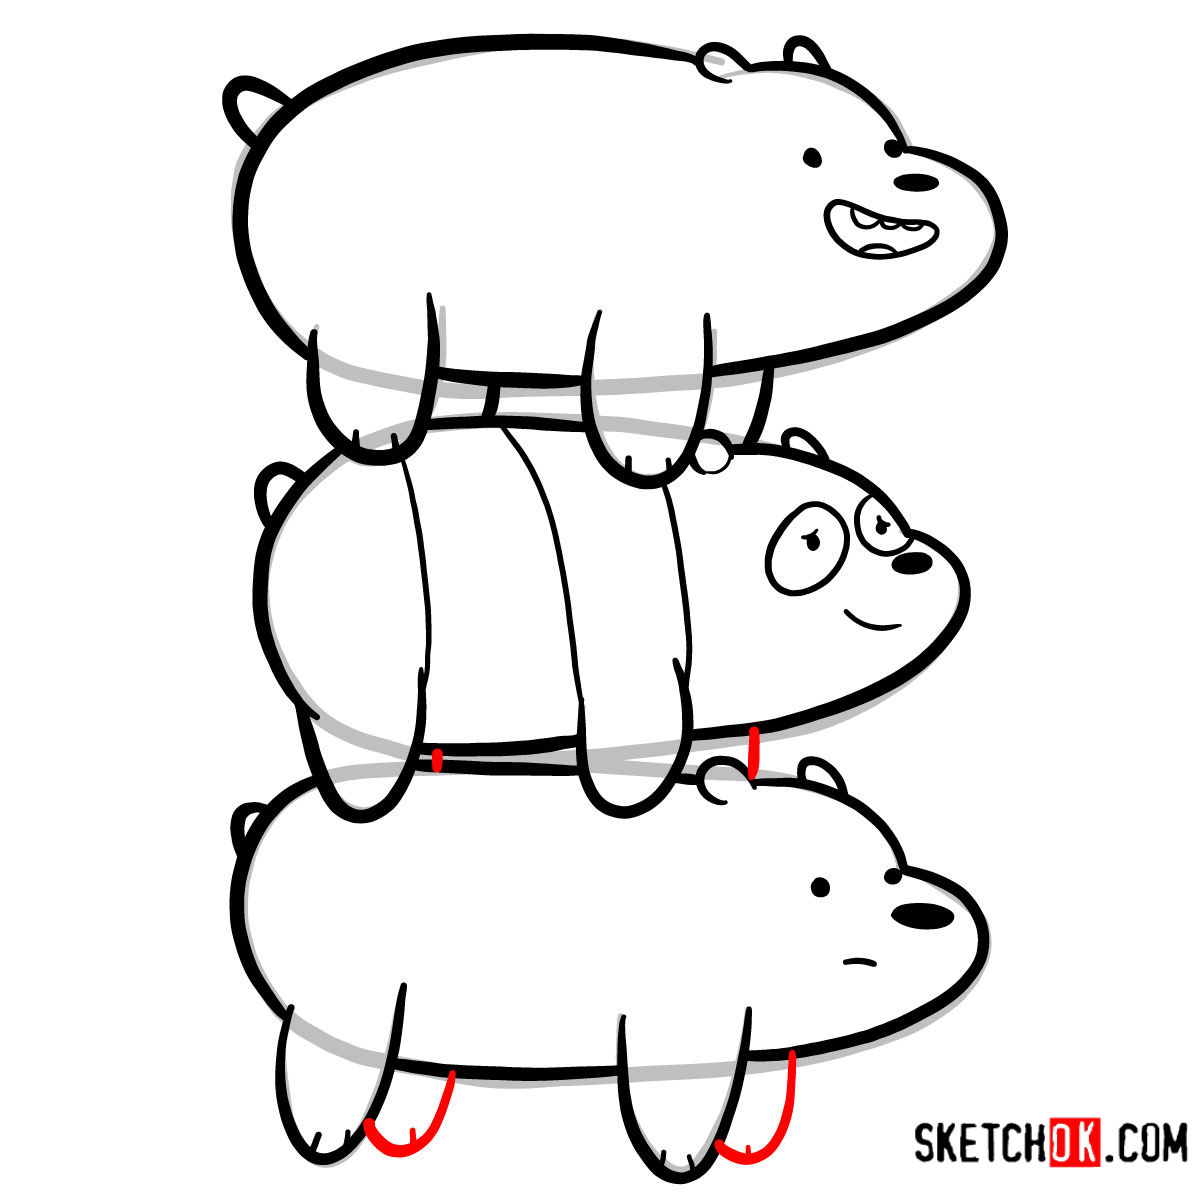 How to draw the bears standing on each others back | We Bare Bears - step 15